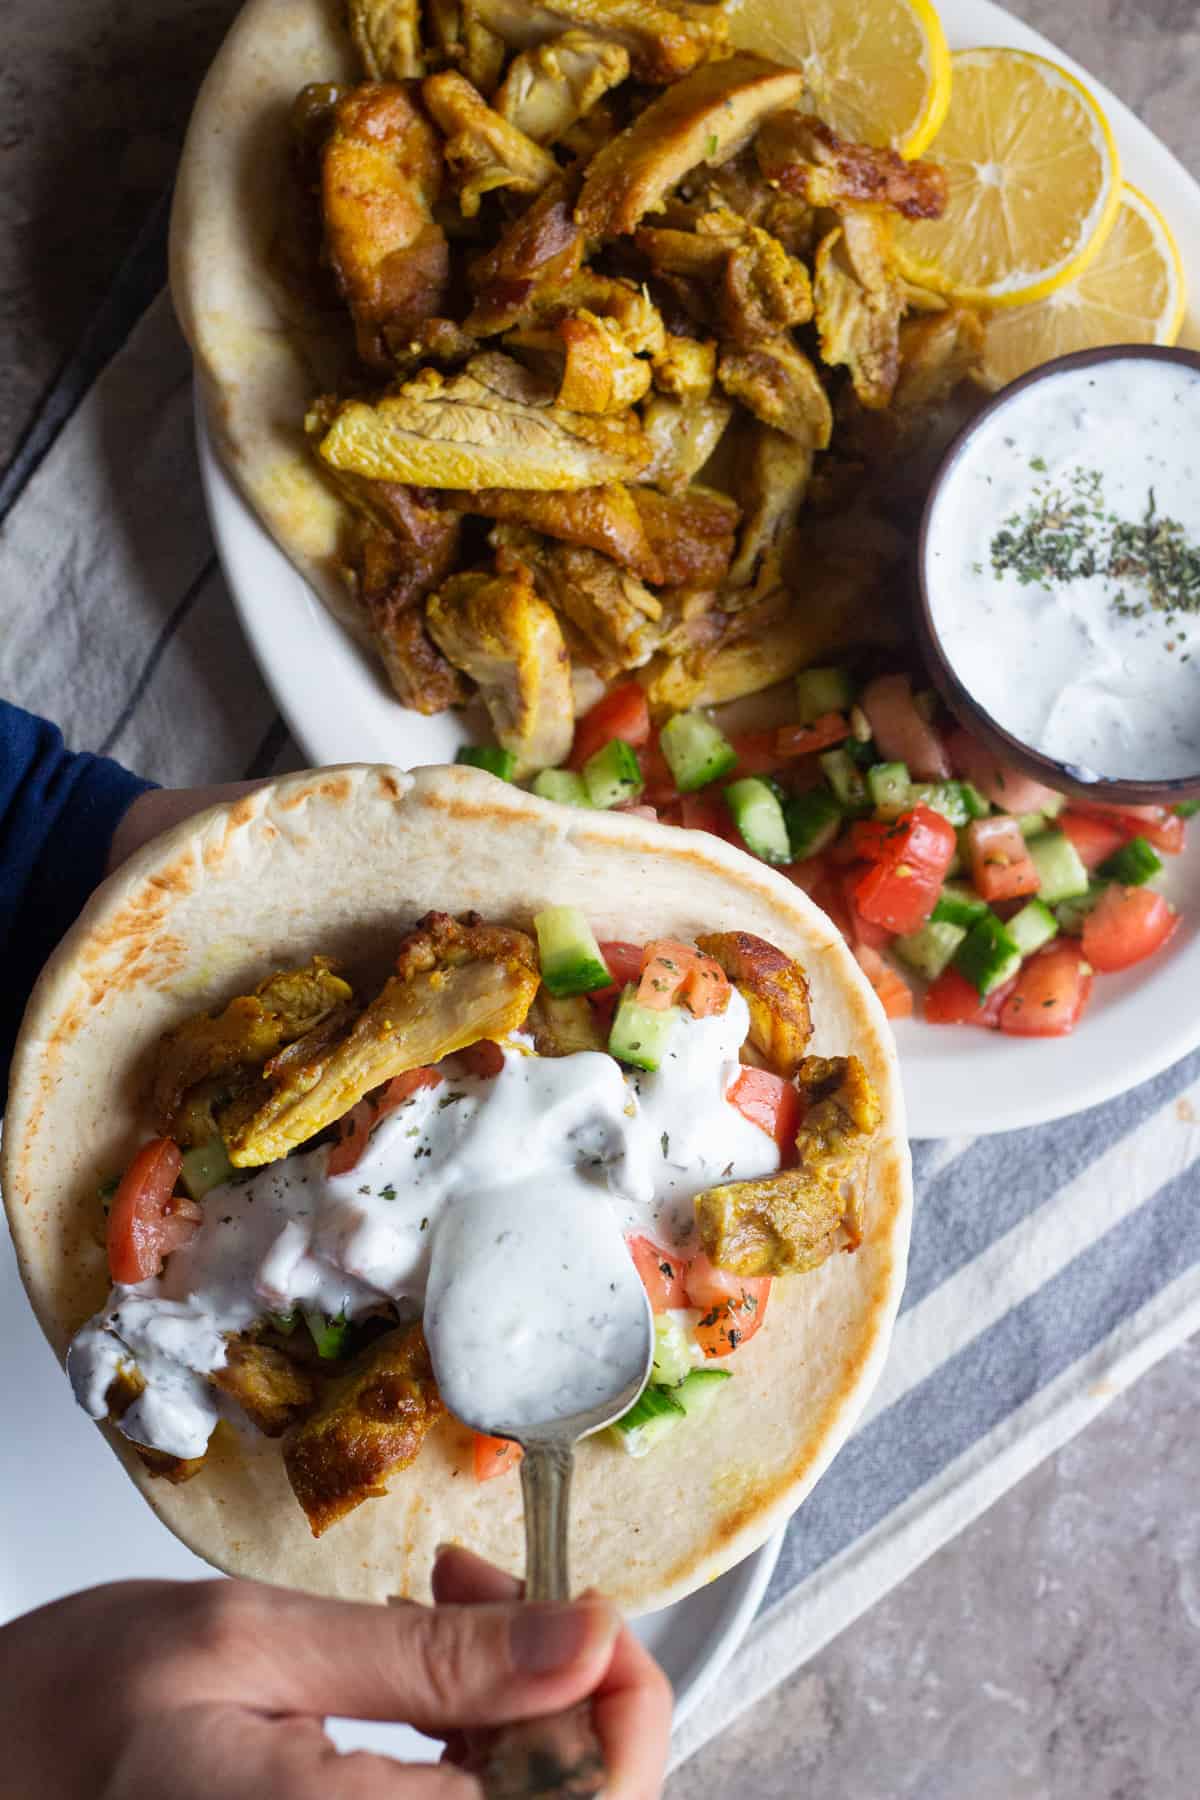 This homemade chicken shawarma recipe is made with a special spice mix that infuses it with classic Middle Eastern flavors. Serve it in a wrap to get the satisfying taste of take-out shawarma at home!
